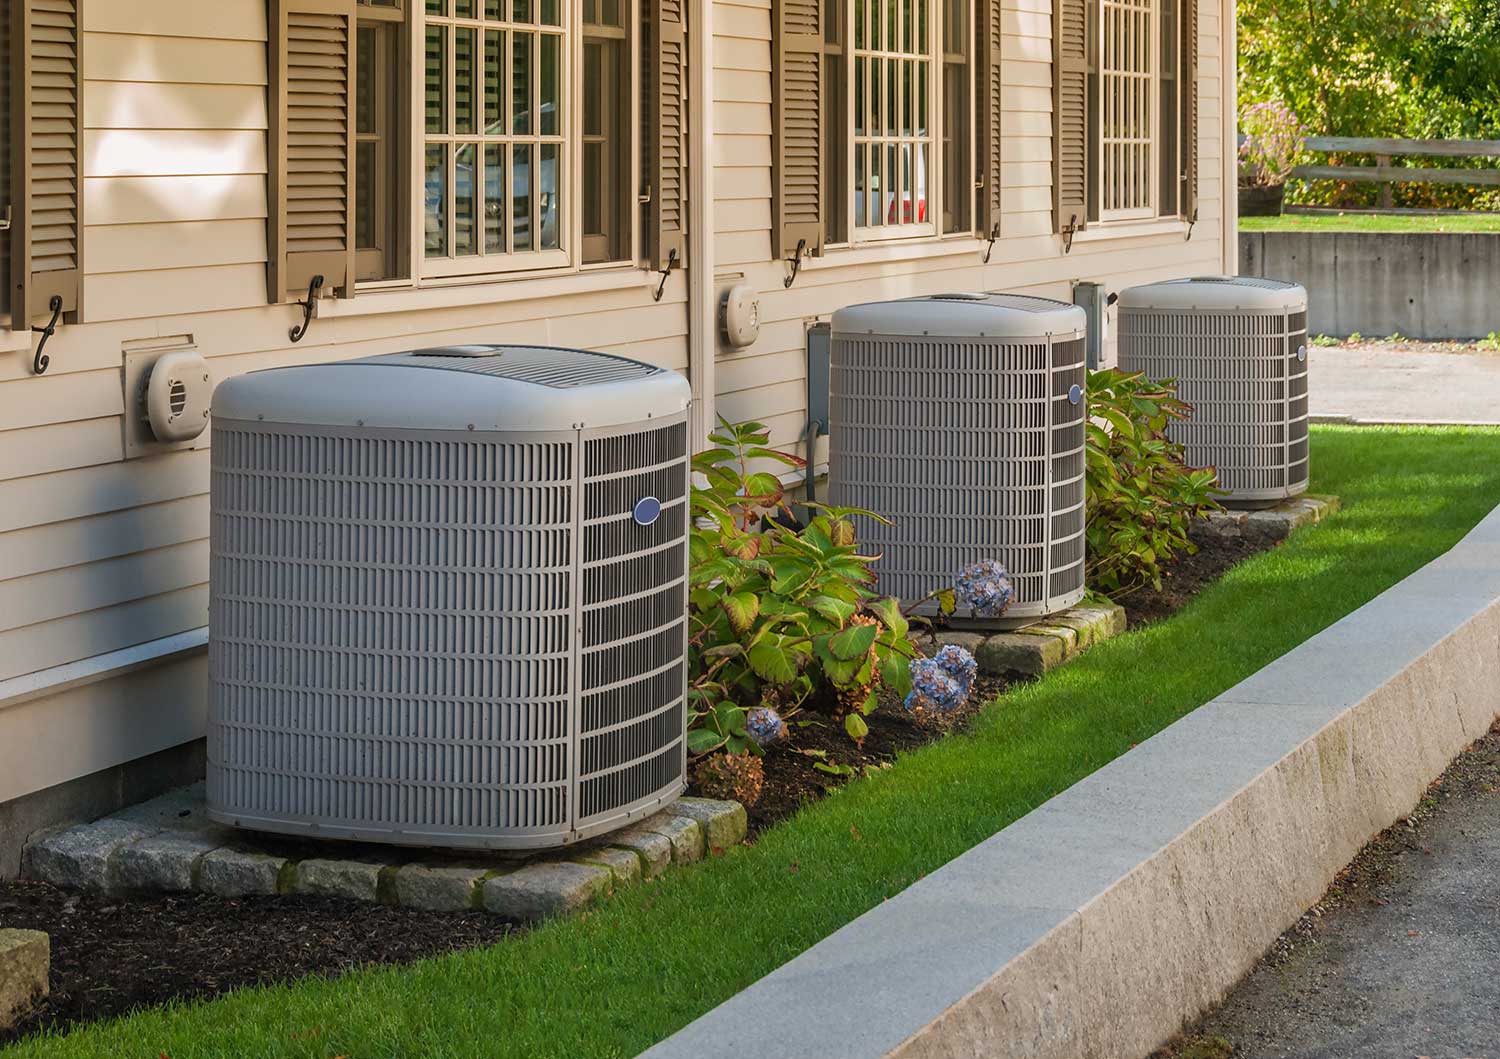 The difference between modern and old air conditioners and furnaces